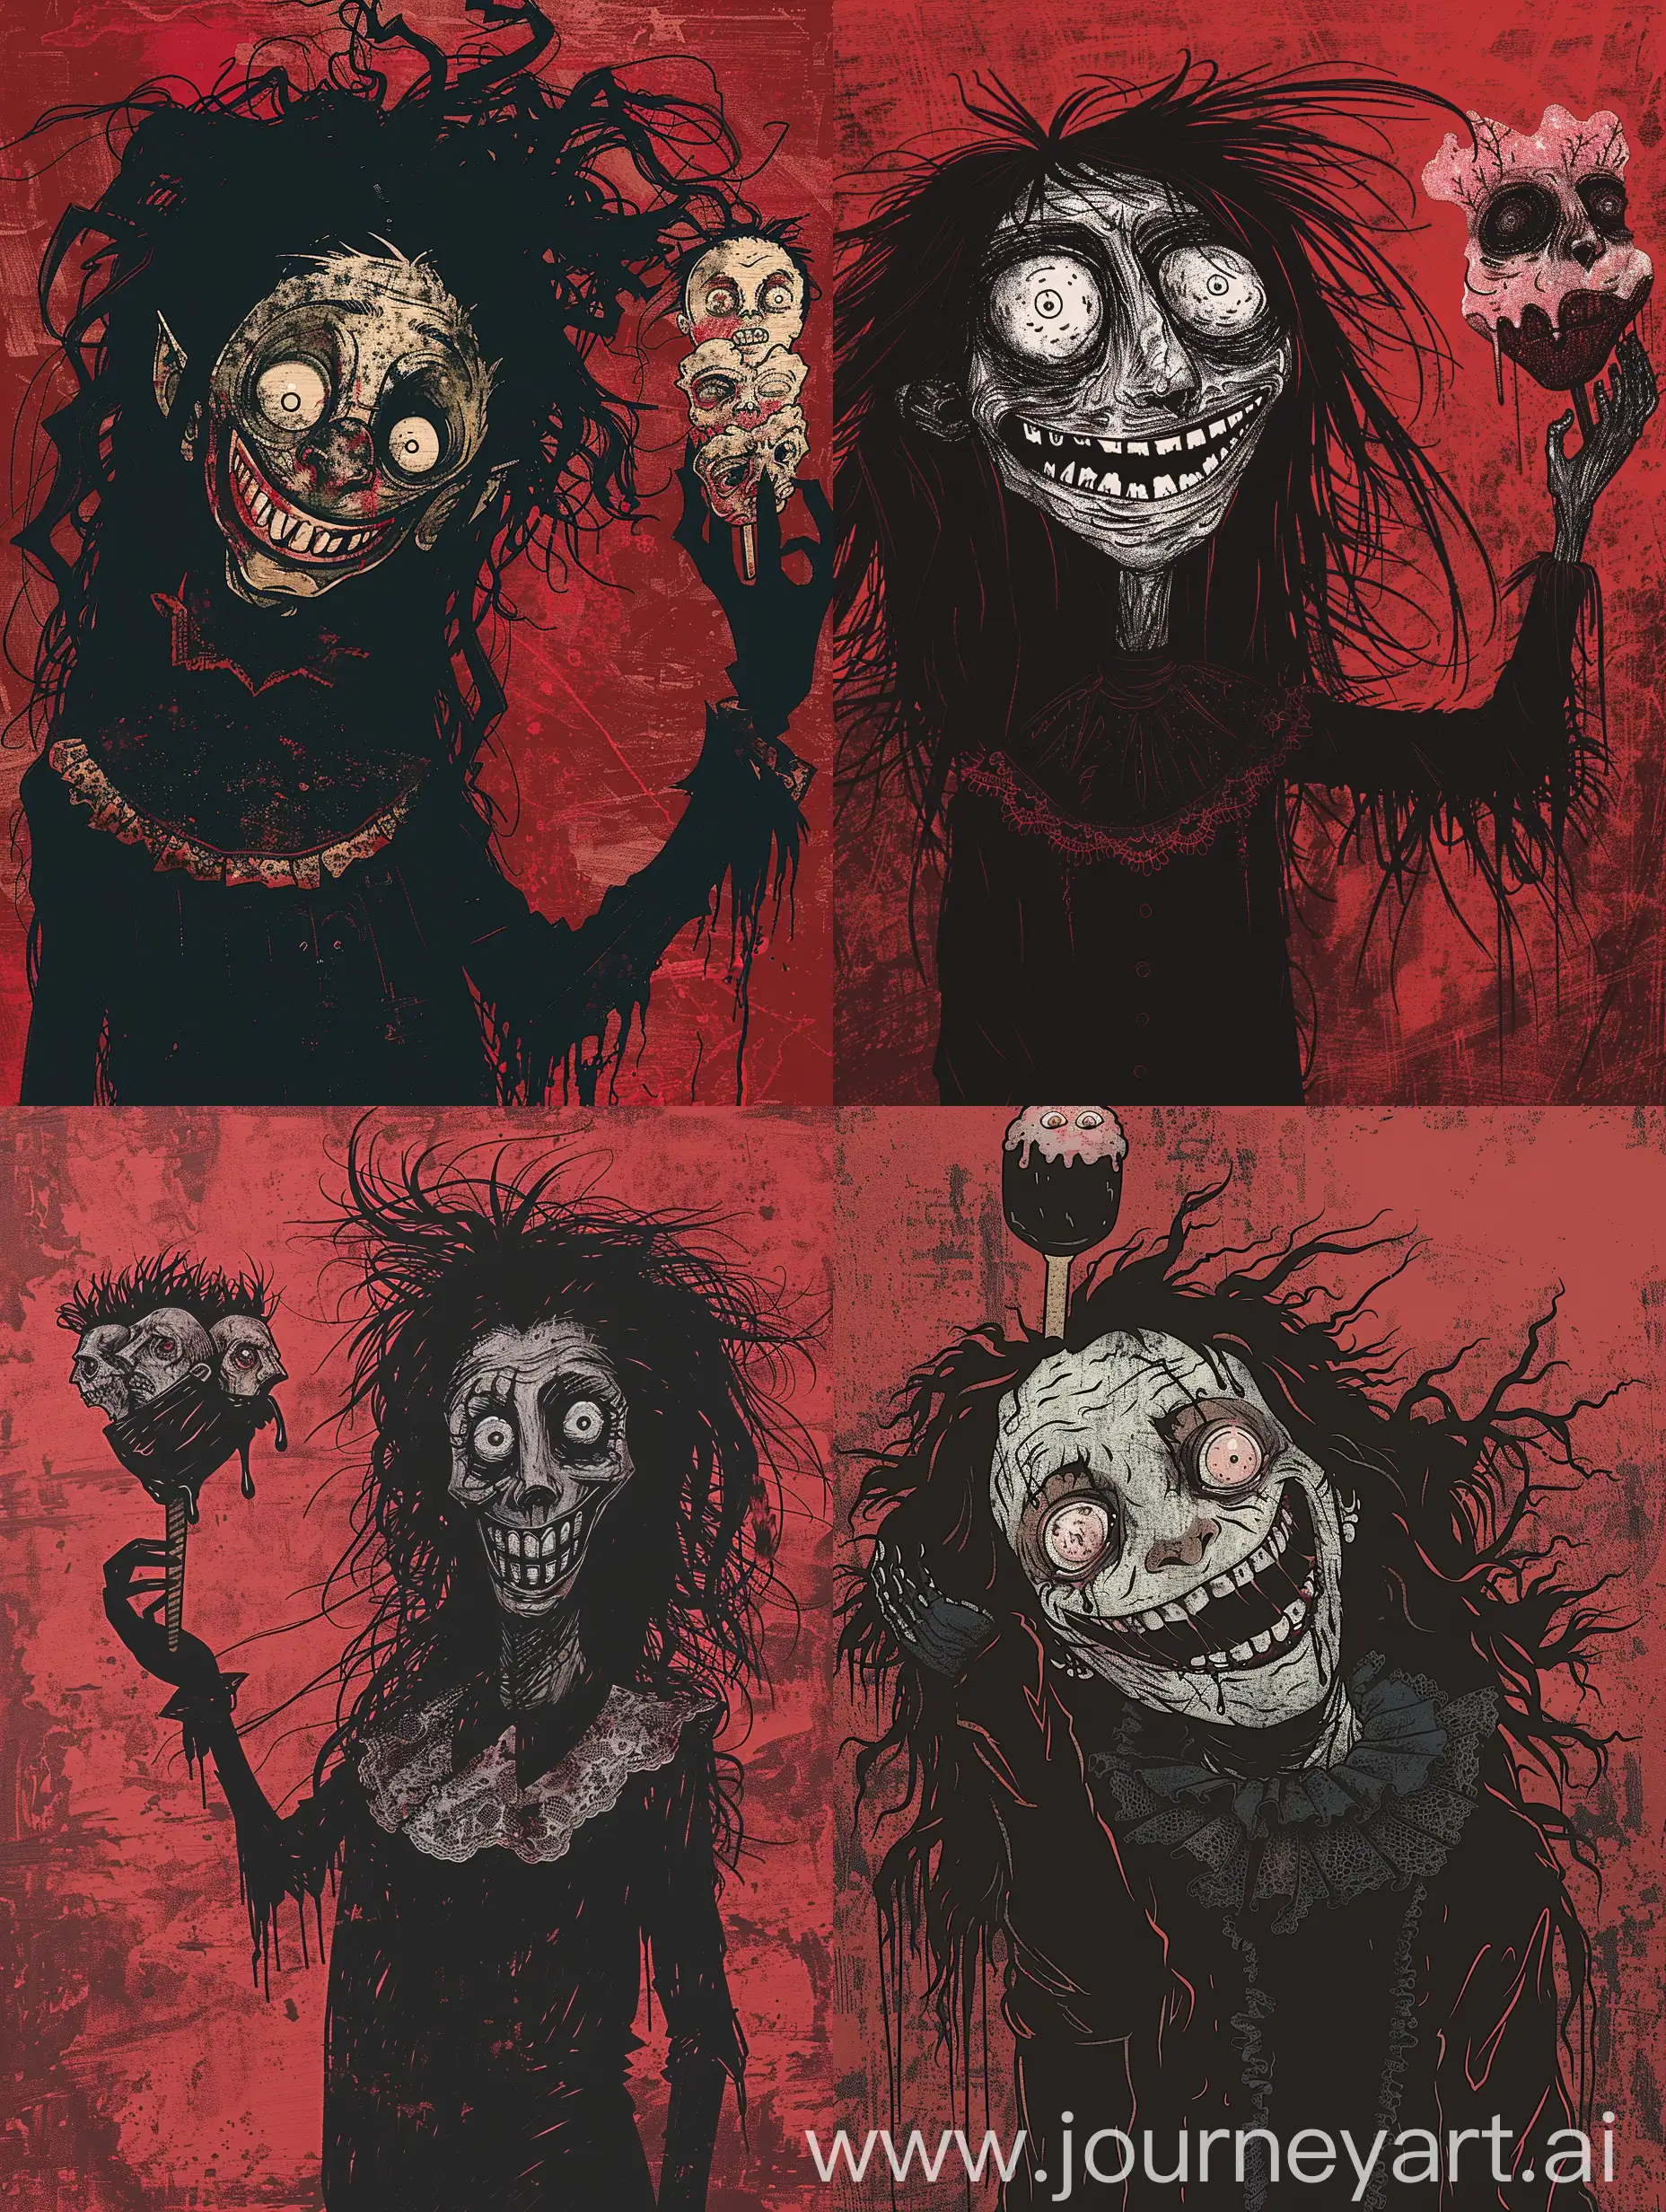 digital illustration, dark gritty art style, horror, psychological themes, distorted face with large unsettling grin and wide staring eyes, a character with long, messy black hair cascading down. The character is wearing a black outfit with a lace collar, adding an air of mystery. The character's hand is raised, holding a melting ice cream composed of three male heads. predominantly red rough textured background, muted tones with red accents, macabre atmosphere, dark messy hair blending into shadowy background, intense and eerie mood, expressive and exaggerated features, high contrast, rough expressive lines, The art style is intricate with fine lines, creating a deep and eerie atmosphere. The high contrast between the dark attire and the background enhances the overall sense of enigma and shadow.